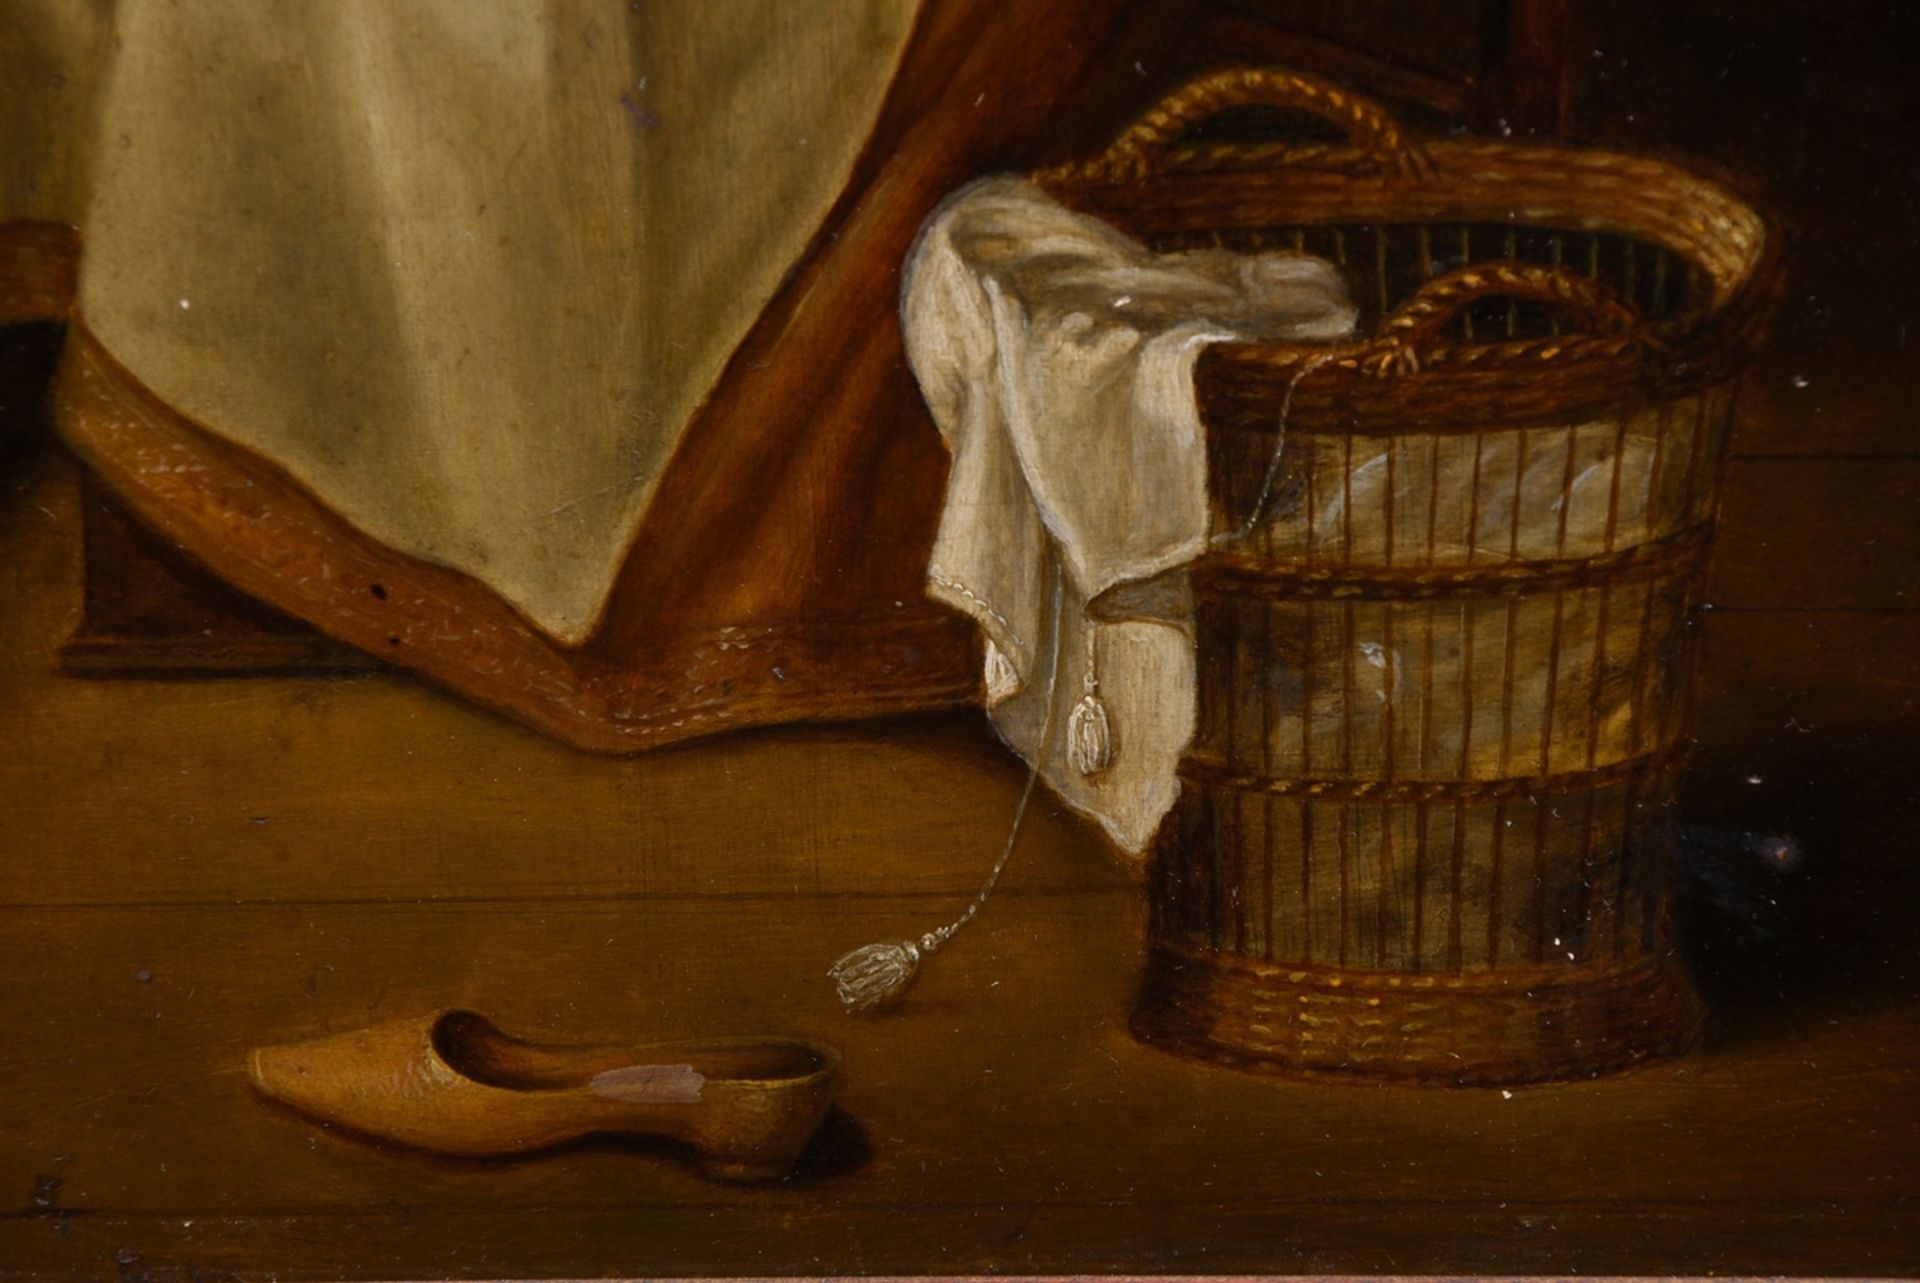 Unknown artist of the 18th c. "Dutch interior scene with couple at wine tasting", oil/wood, magnifi - Image 5 of 8